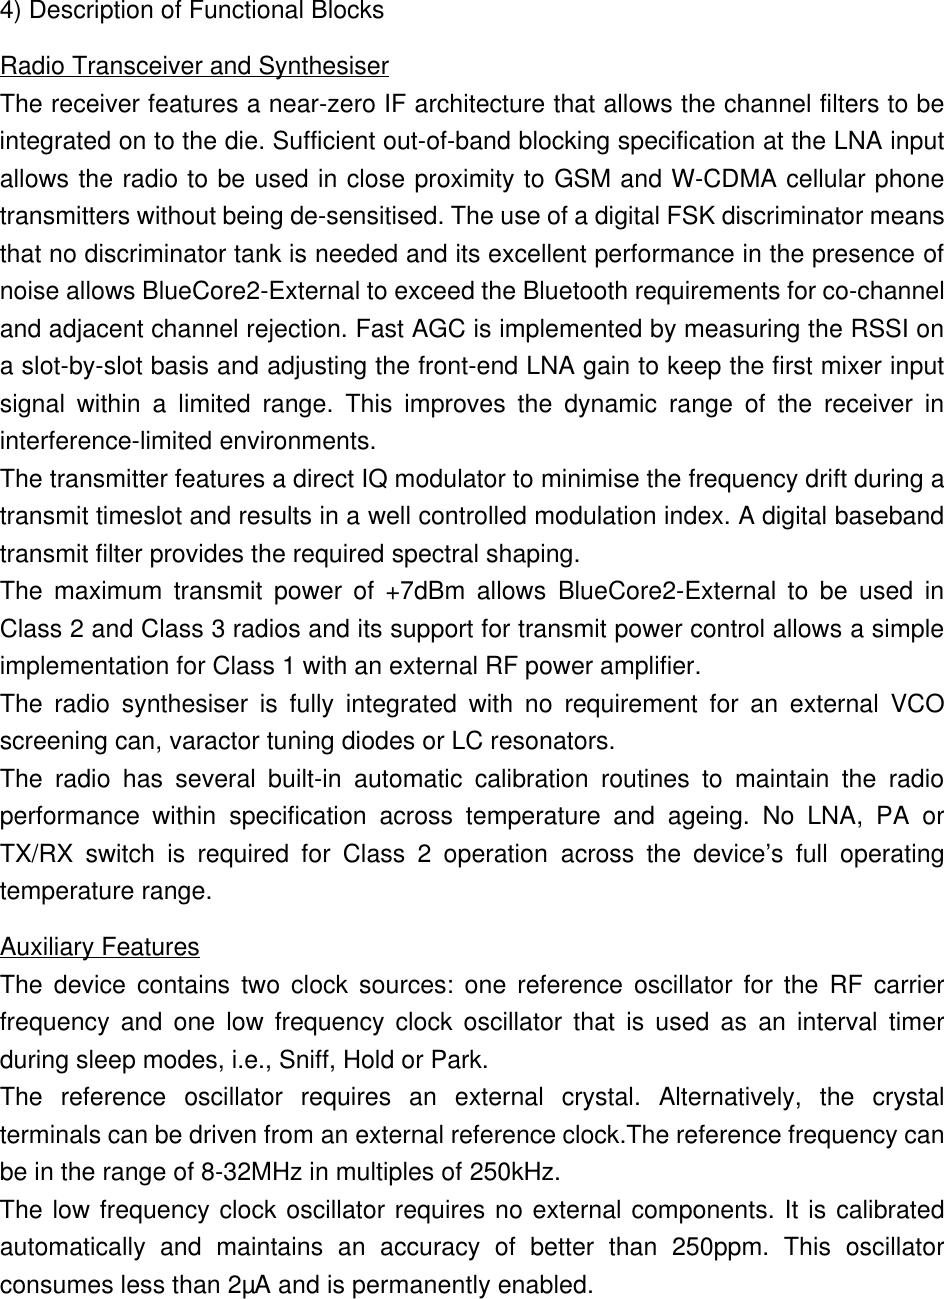 4) Description of Functional BlocksRadio Transceiver and SynthesiserThe receiver features a near-zero IF architecture that allows the channel filters to beintegrated on to the die. Sufficient out-of-band blocking specification at the LNA inputallows the radio to be used in close proximity to GSM and W-CDMA cellular phonetransmitters without being de-sensitised. The use of a digital FSK discriminator meansthat no discriminator tank is needed and its excellent performance in the presence ofnoise allows BlueCore2-External to exceed the Bluetooth requirements for co-channeland adjacent channel rejection. Fast AGC is implemented by measuring the RSSI ona slot-by-slot basis and adjusting the front-end LNA gain to keep the first mixer inputsignal within a limited range. This improves the dynamic range of the receiver ininterference-limited environments.The transmitter features a direct IQ modulator to minimise the frequency drift during atransmit timeslot and results in a well controlled modulation index. A digital basebandtransmit filter provides the required spectral shaping.The maximum transmit power of +7dBm allows BlueCore2-External to be used inClass 2 and Class 3 radios and its support for transmit power control allows a simpleimplementation for Class 1 with an external RF power amplifier.The radio synthesiser is fully integrated with no requirement for an external VCOscreening can, varactor tuning diodes or LC resonators.The radio has several built-in automatic calibration routines to maintain the radioperformance within specification across temperature and ageing. No LNA,  PA orTX/RX switch is required for Class 2 operation across the device’s full operatingtemperature range.Auxiliary FeaturesThe device contains two clock sources: one reference oscillator for the RF carrierfrequency and one low frequency clock oscillator that is used as an interval timerduring sleep modes, i.e., Sniff, Hold or Park.The reference oscillator requires an external crystal. Alternatively, the crystalterminals can be driven from an external reference clock.The reference frequency canbe in the range of 8-32MHz in multiples of 250kHz.The low frequency clock oscillator requires no external components. It is calibratedautomatically and maintains an accuracy of better than 250ppm. This oscillatorconsumes less than 2µA and is permanently enabled.